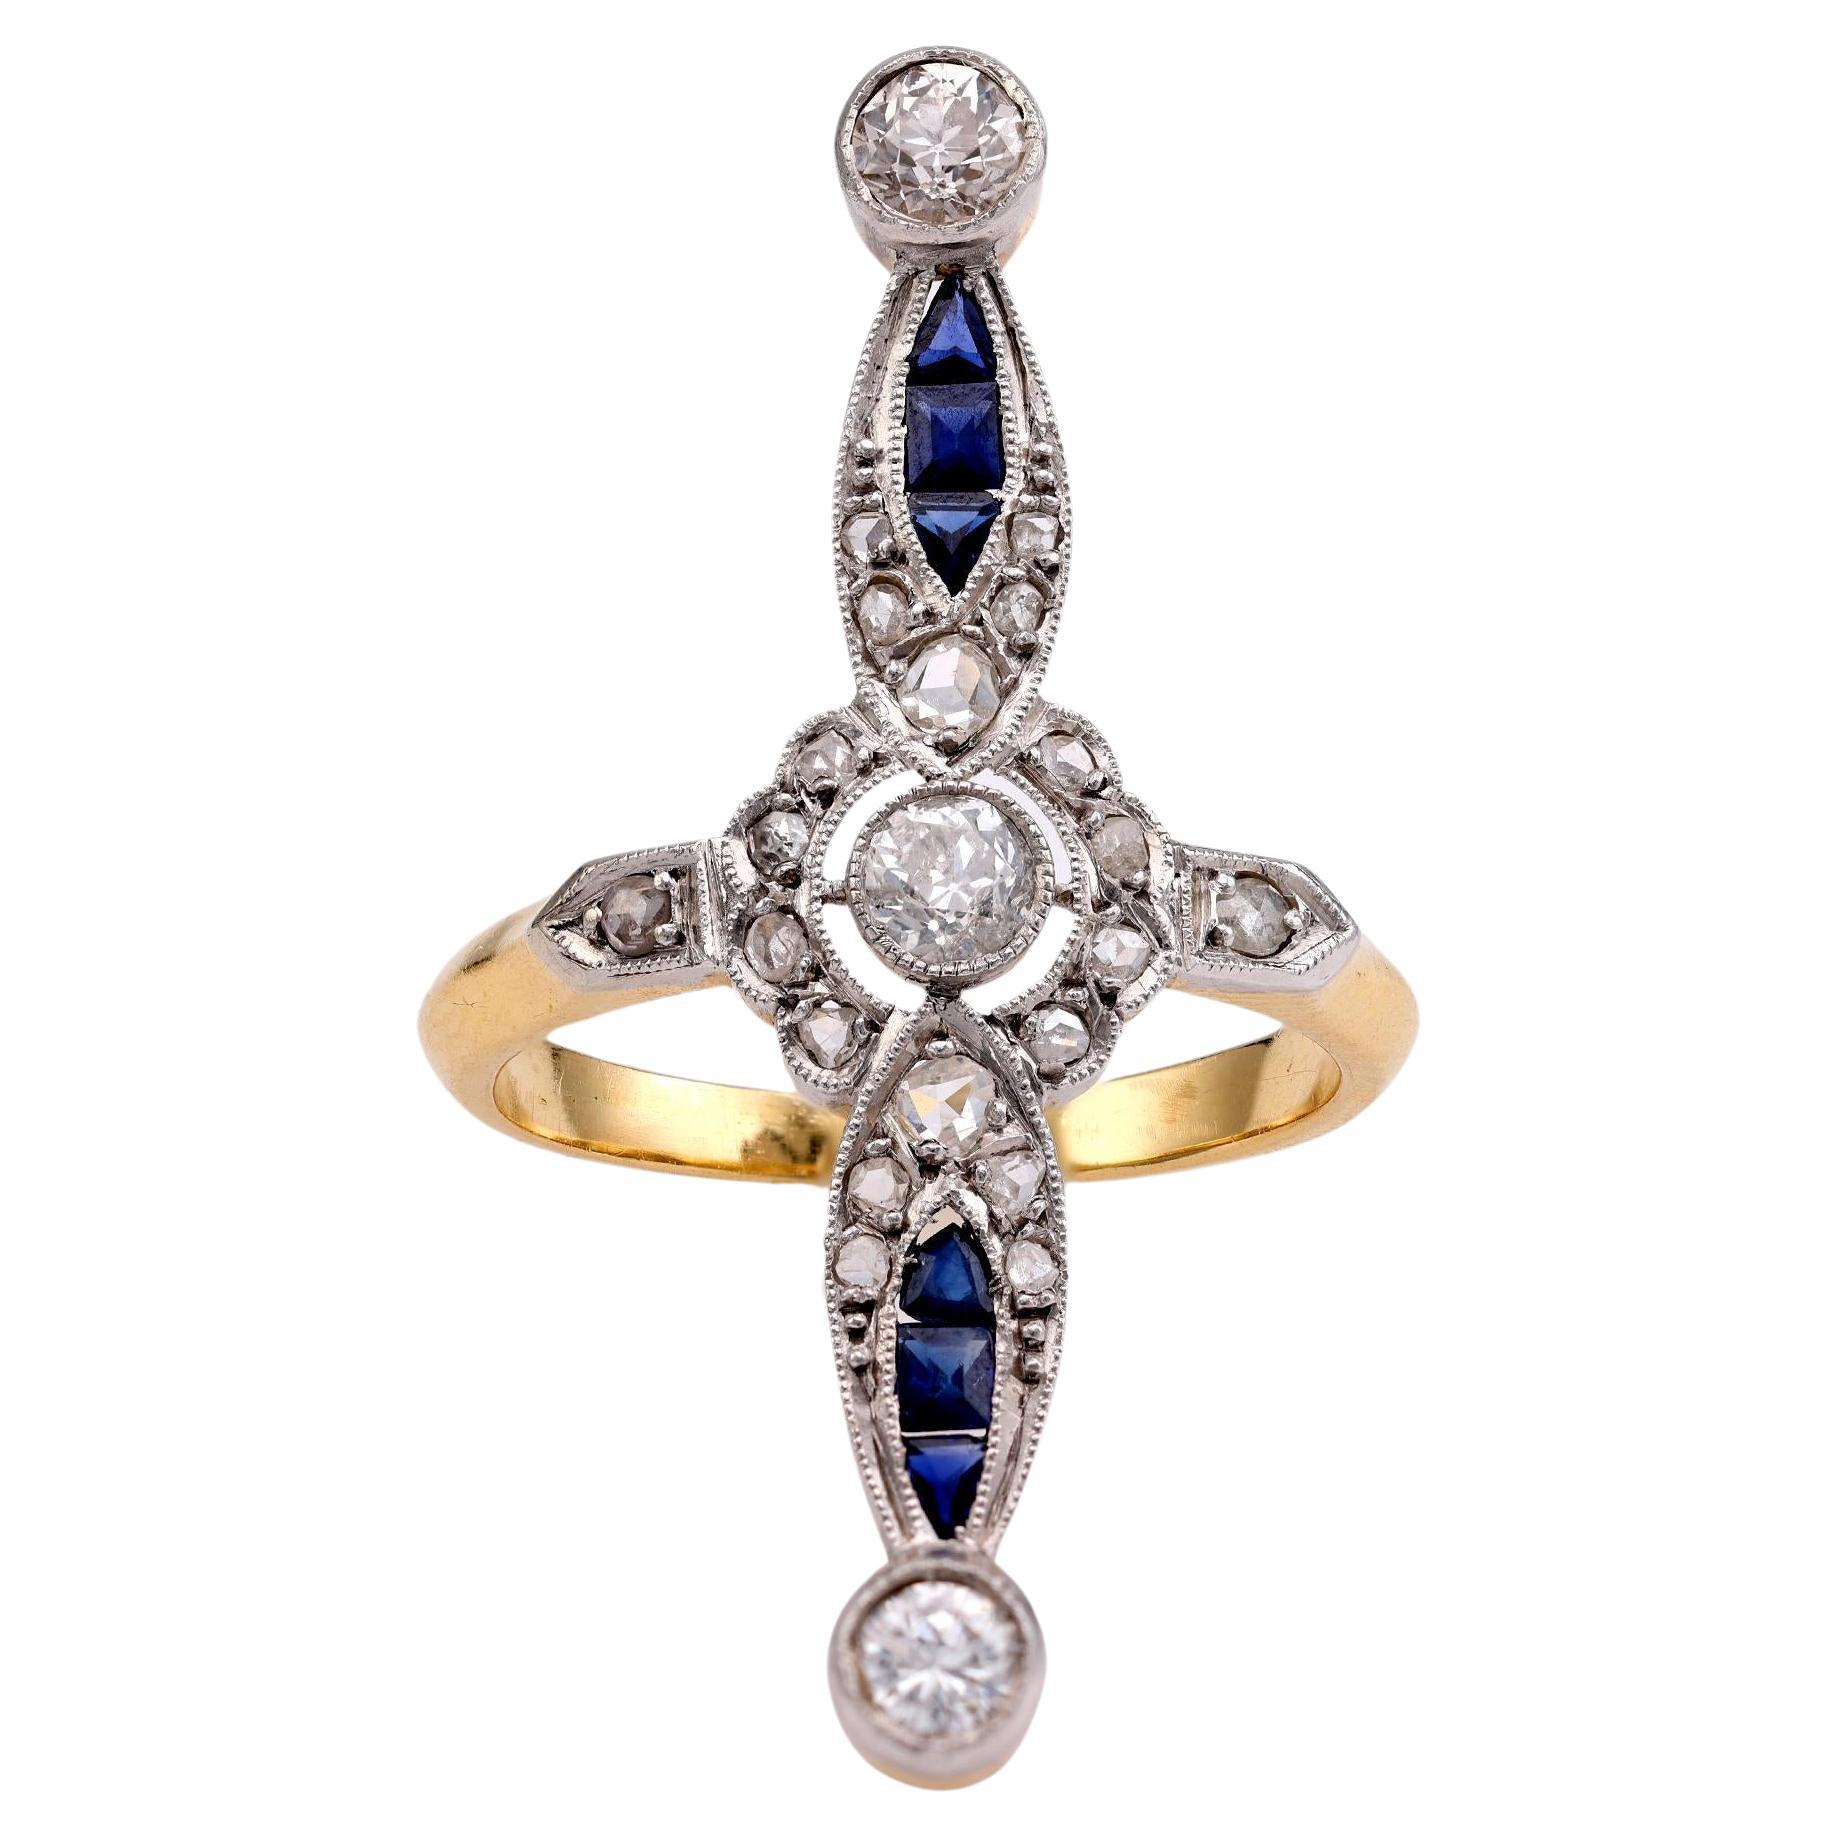 Belle Epoque Diamond and Sapphire Cocktail Ring